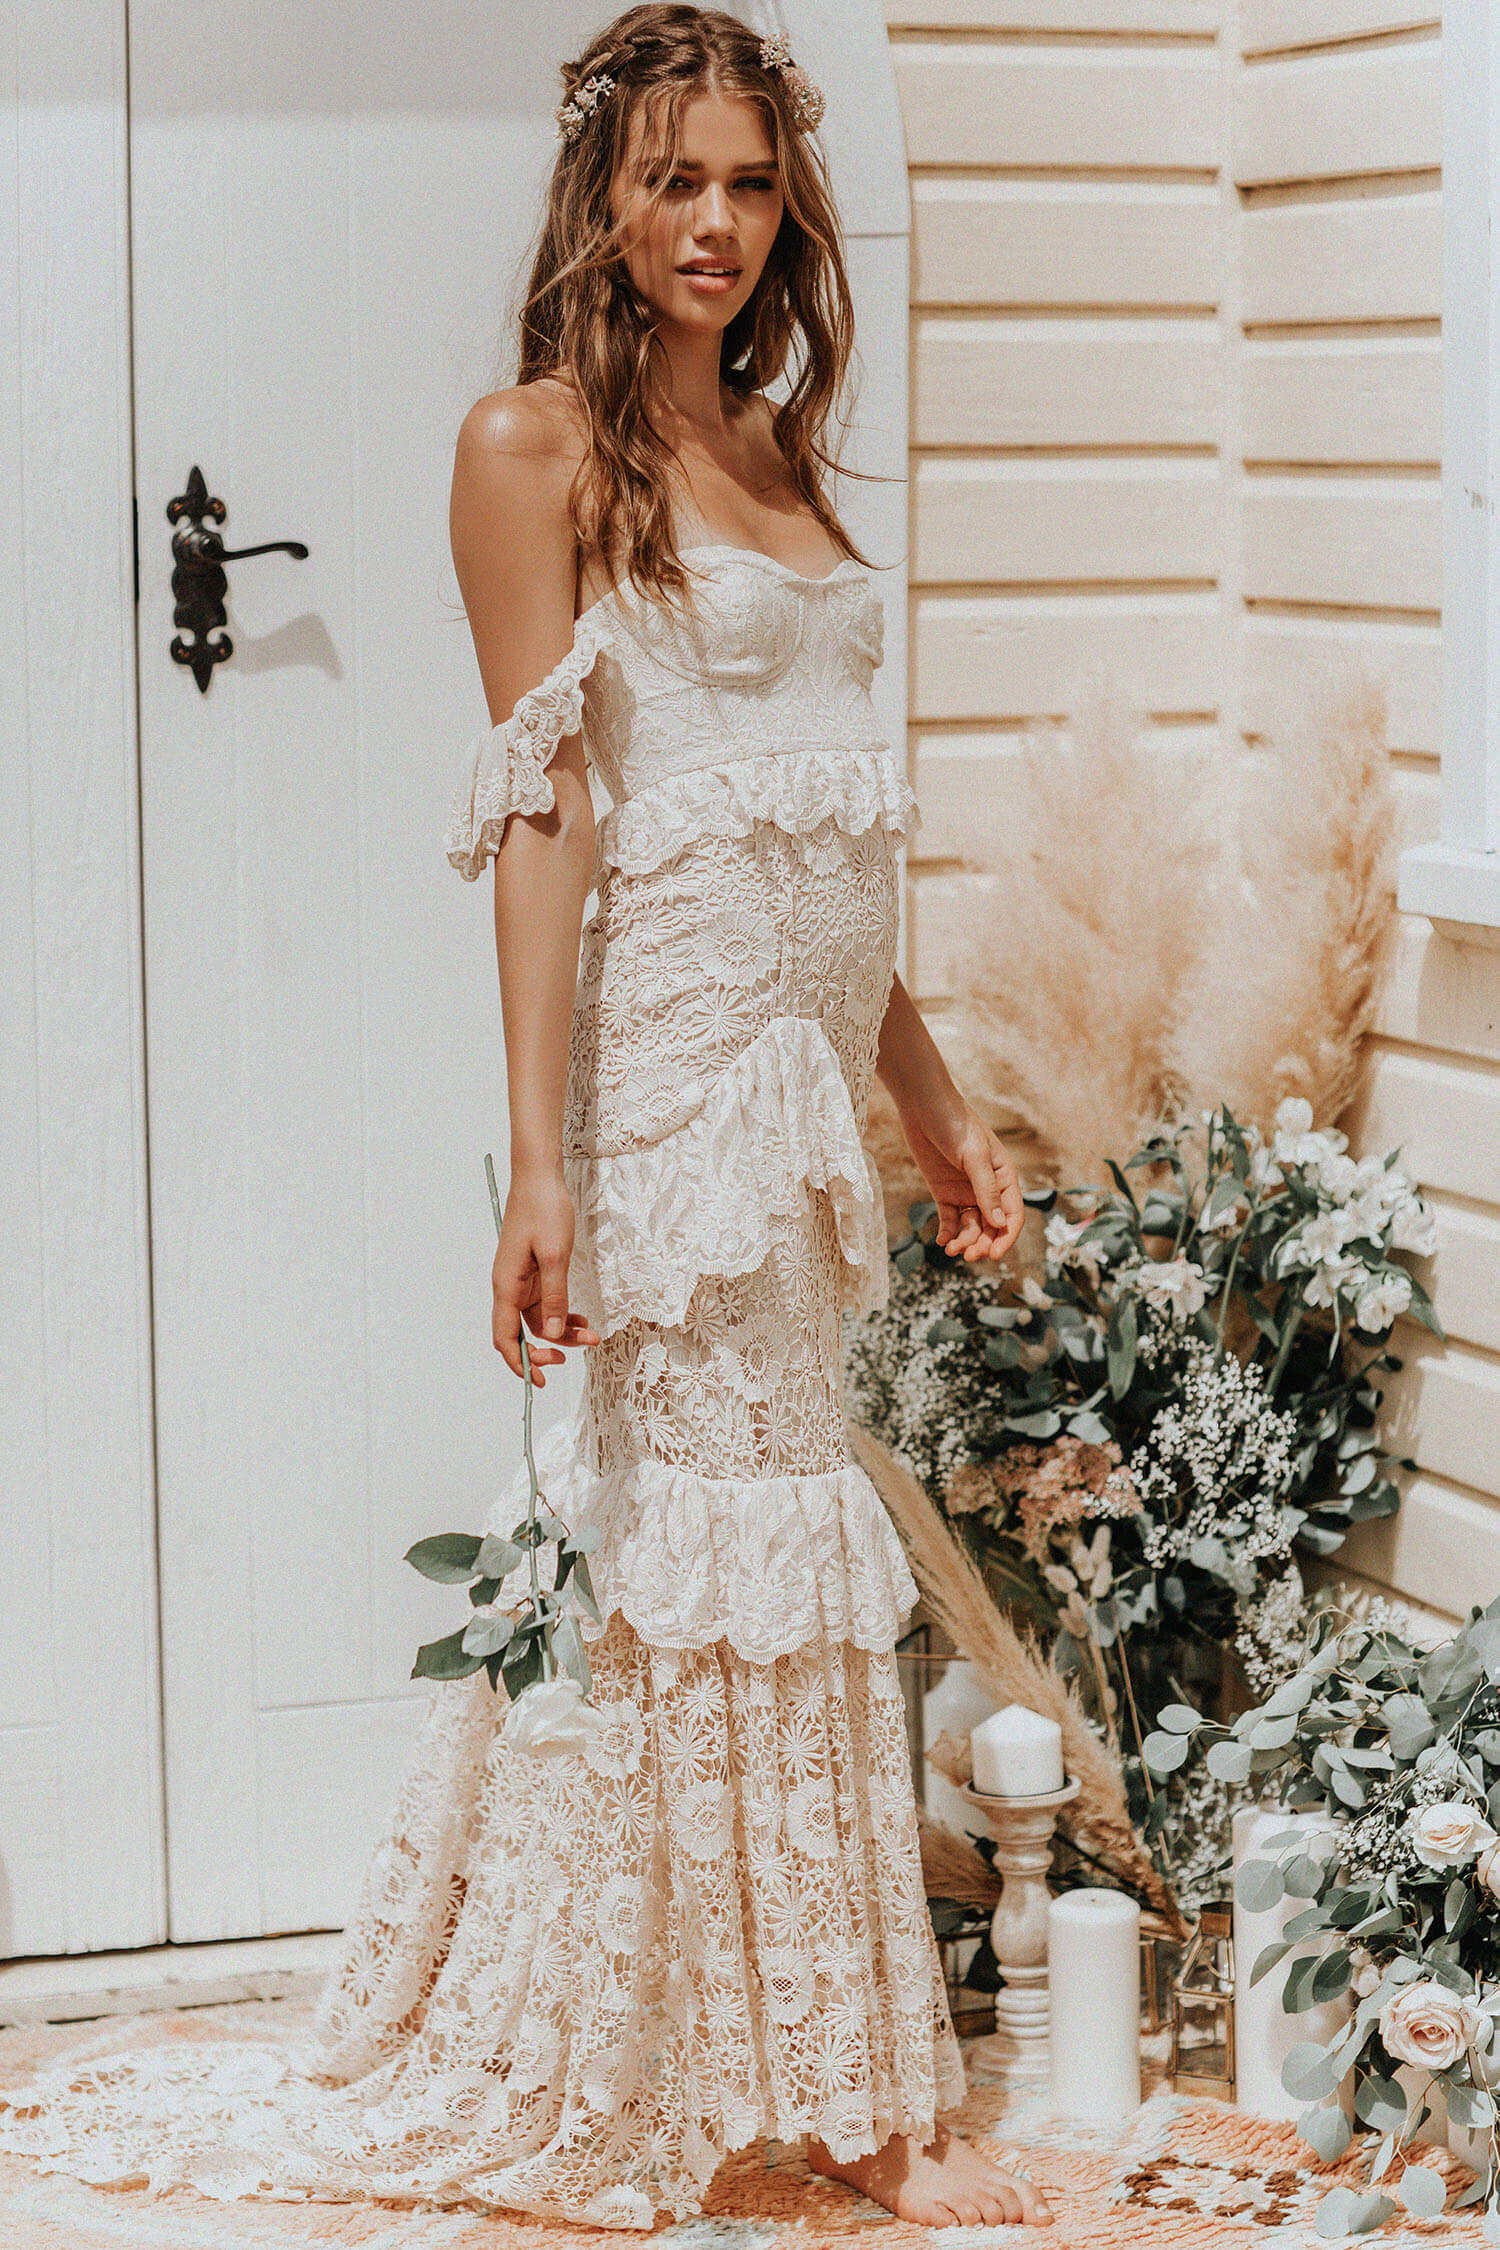 Boho Wedding Gowns
 The most romantic boho wedding dresses every bride will